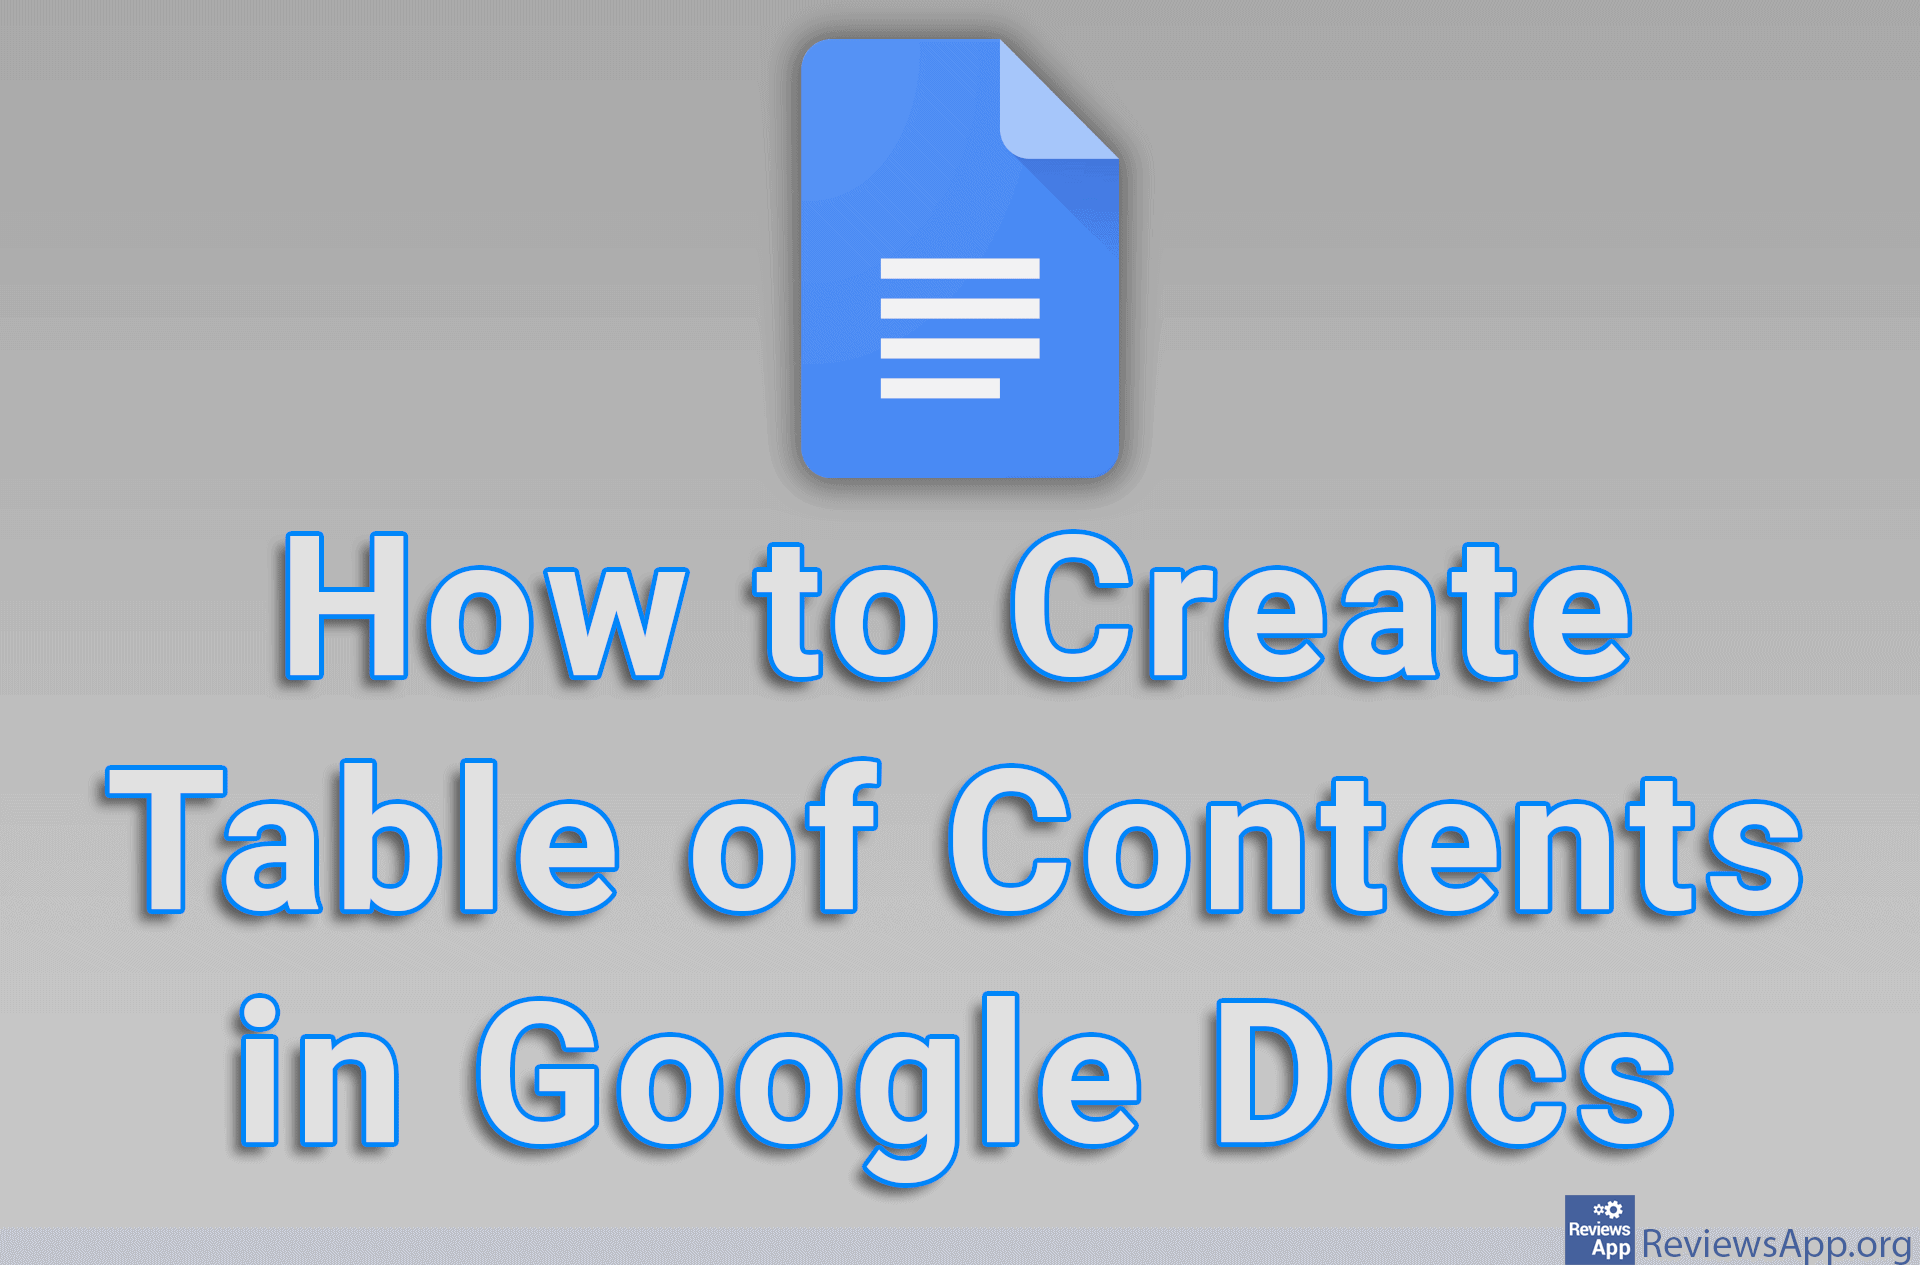 How to Create Table of Contents in Google Docs